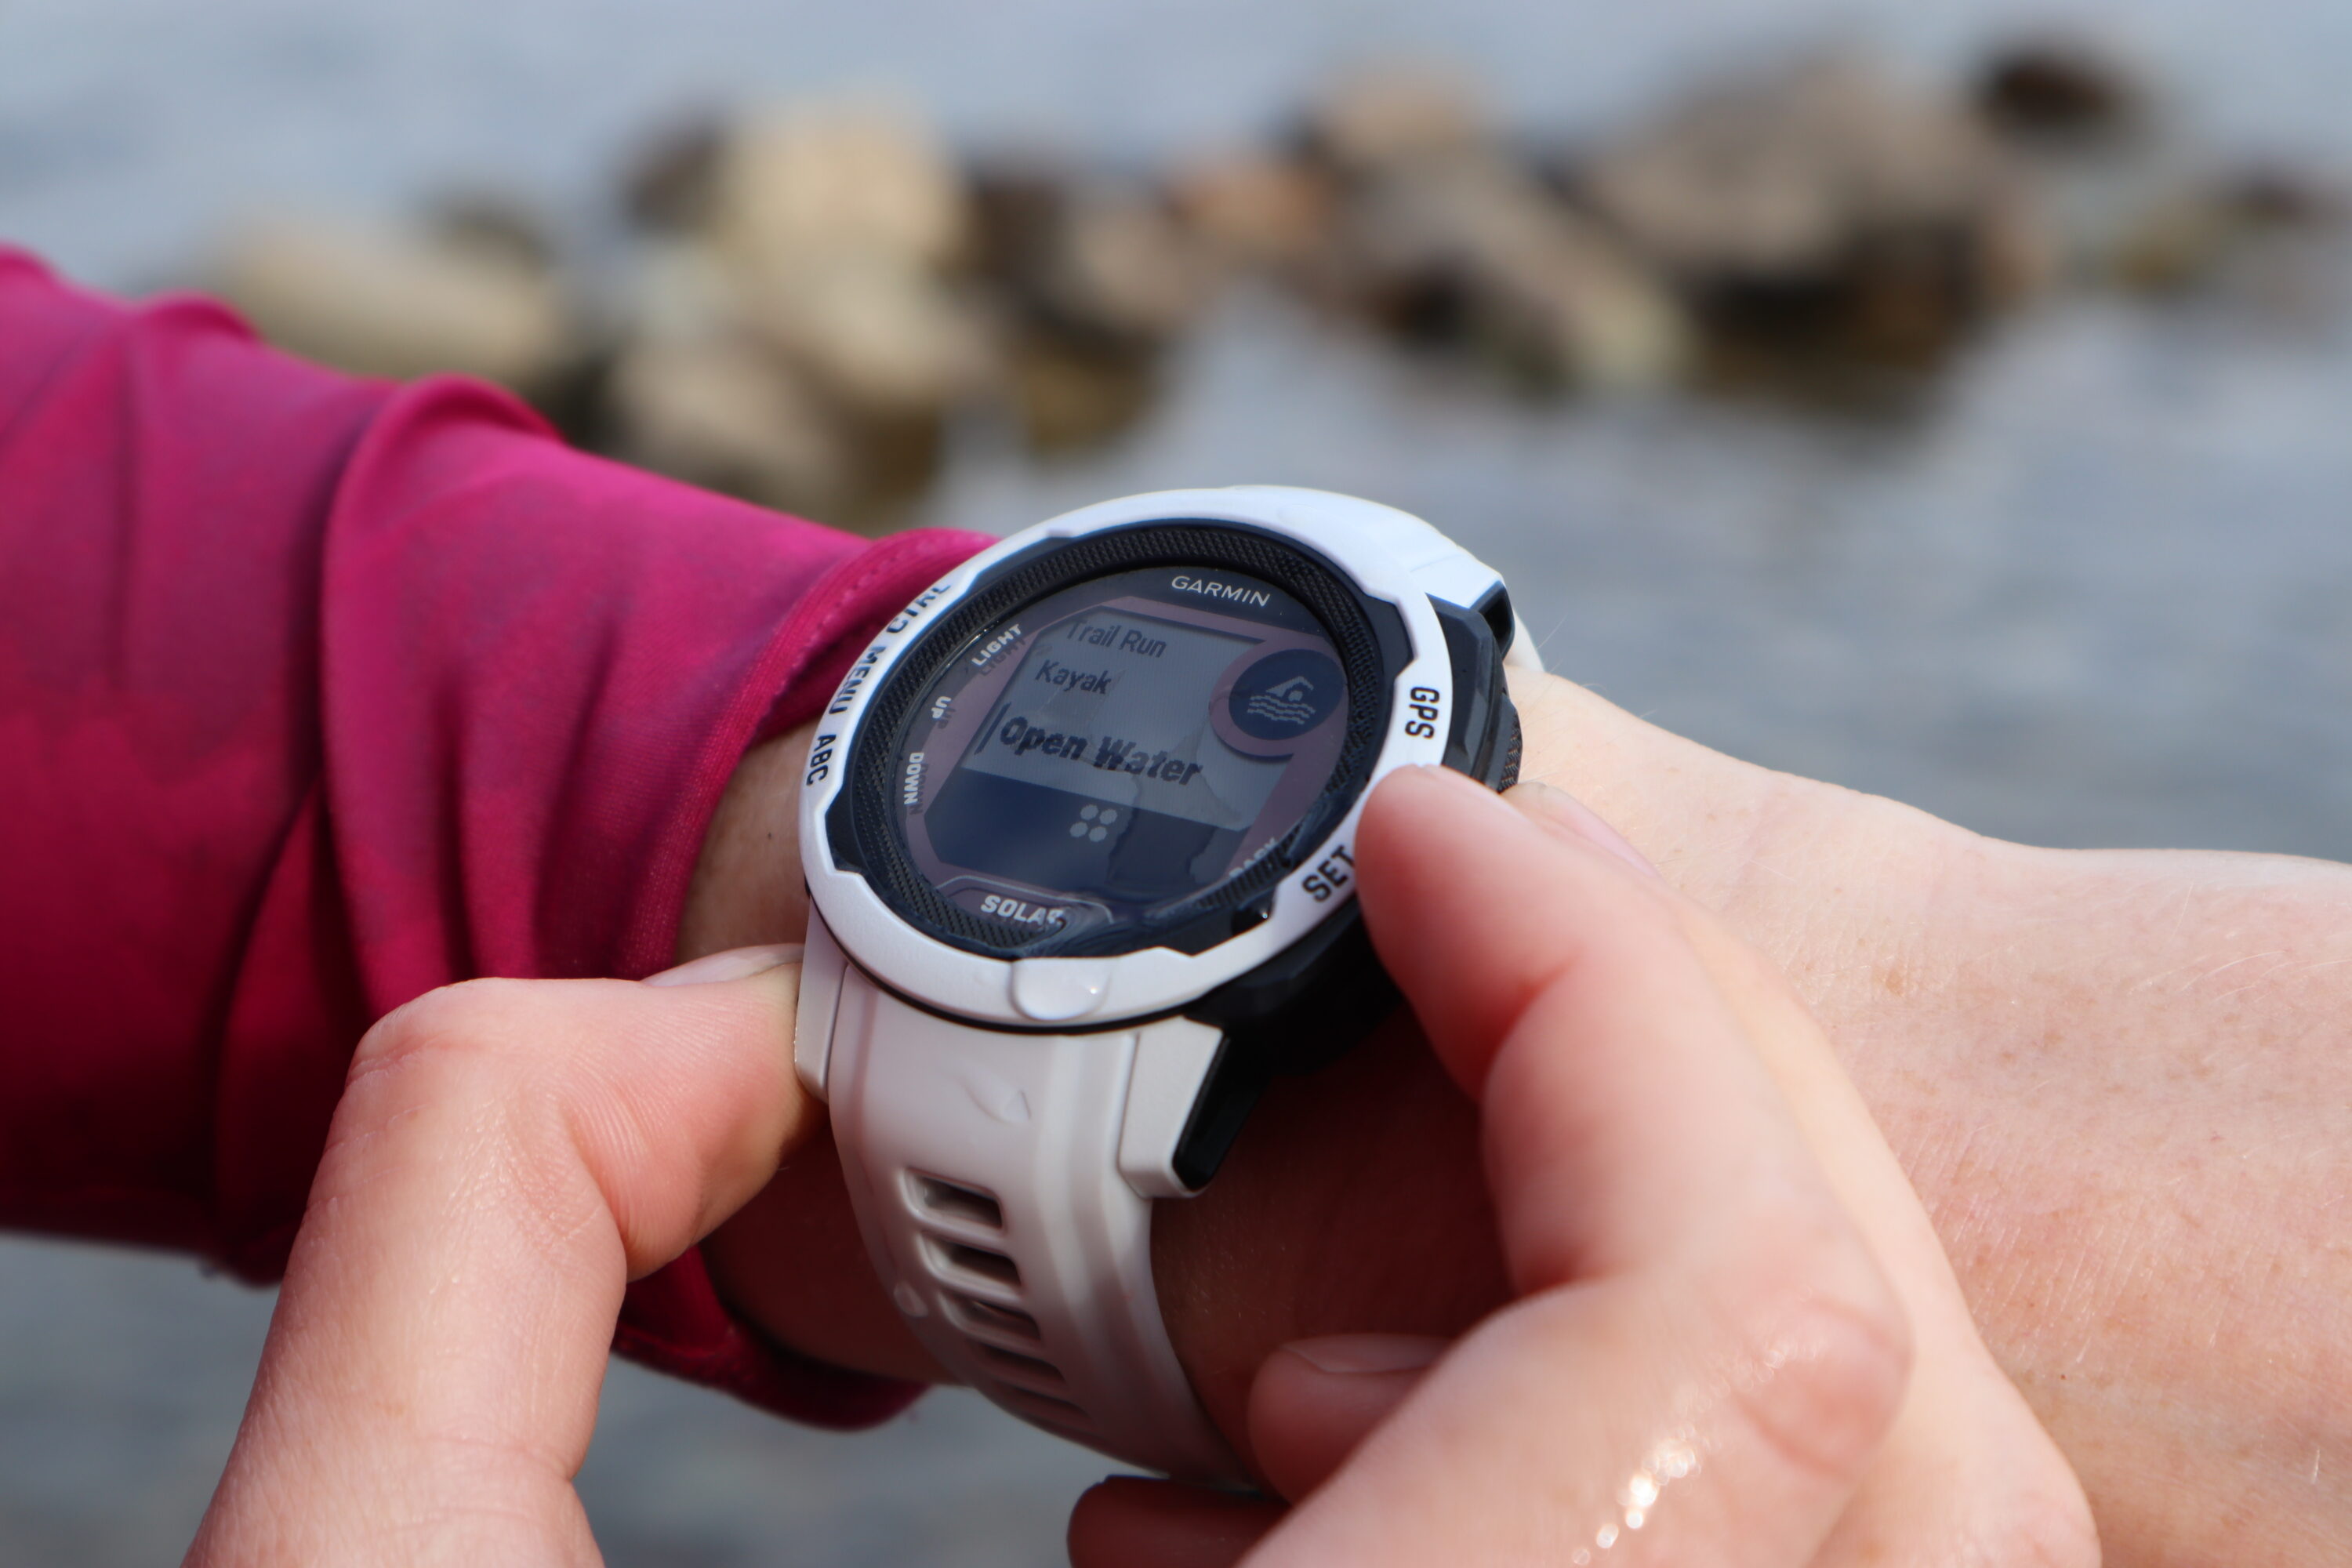 Garmin Instinct Solar Review - Unlimited Battery Life! Can It